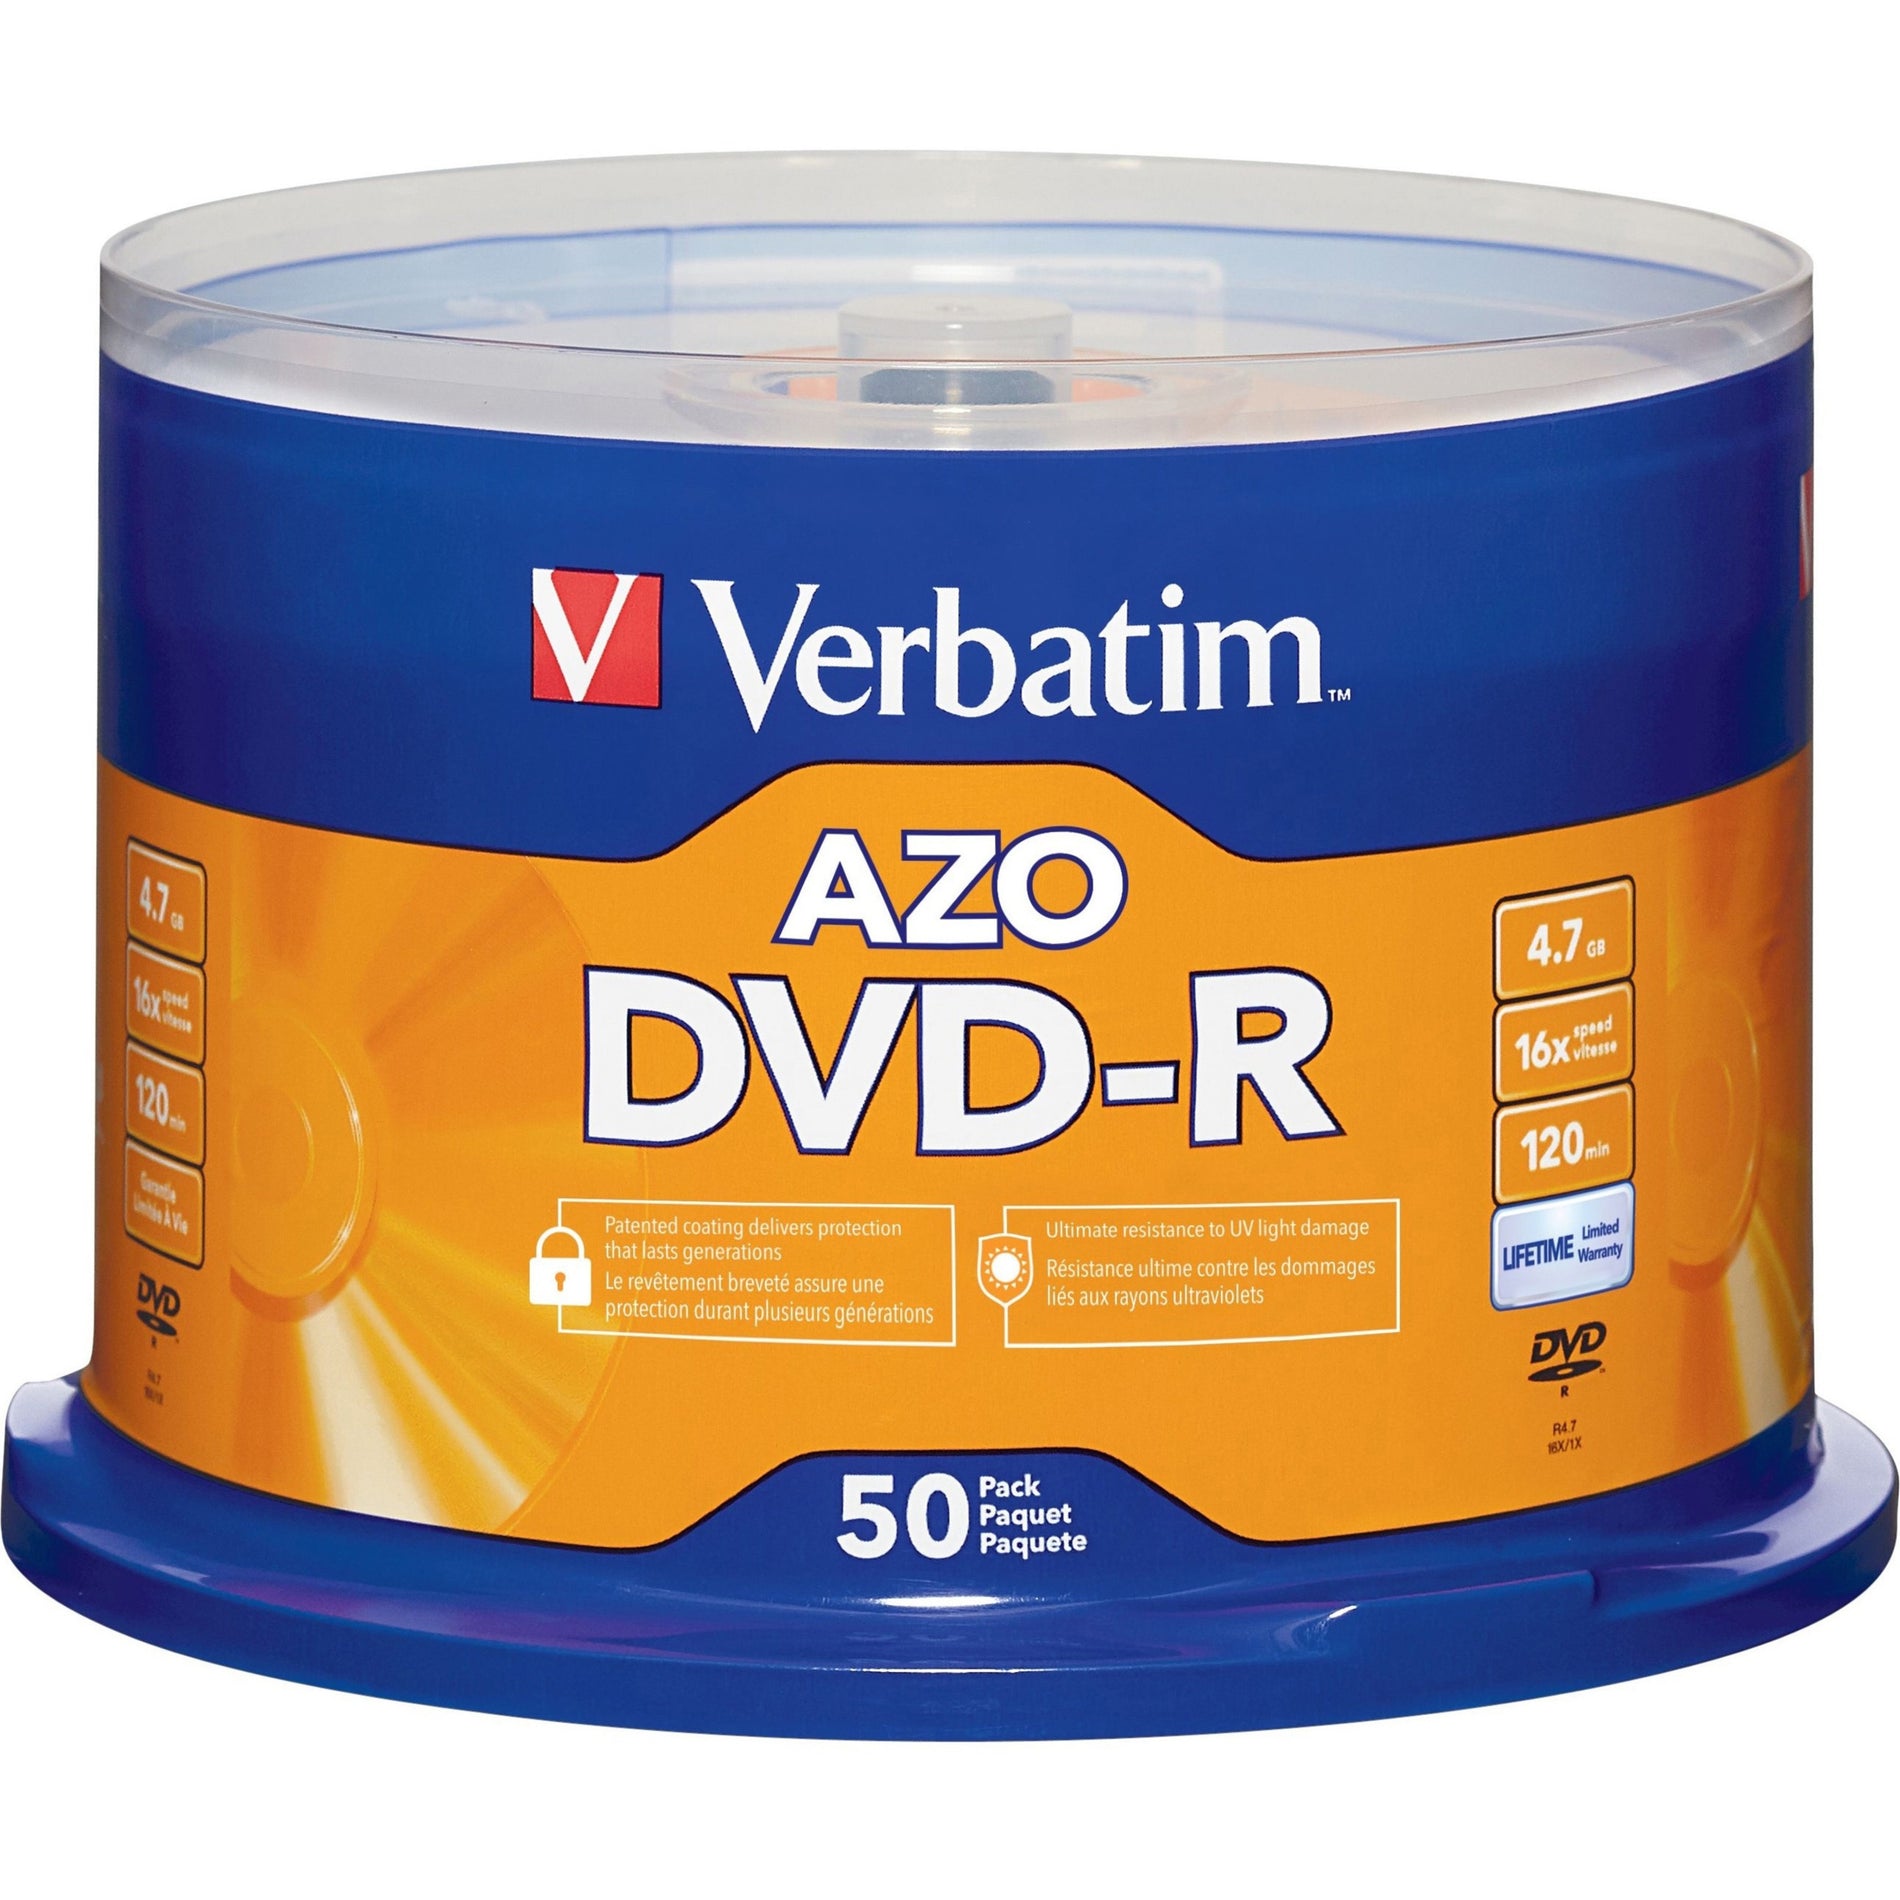 Verbatim 95101 AZO DVD-R 4.7GB 16X with Branded Surface - 50pk Spindle, 16X Speed, 4.7GB, For Recorders/Drives